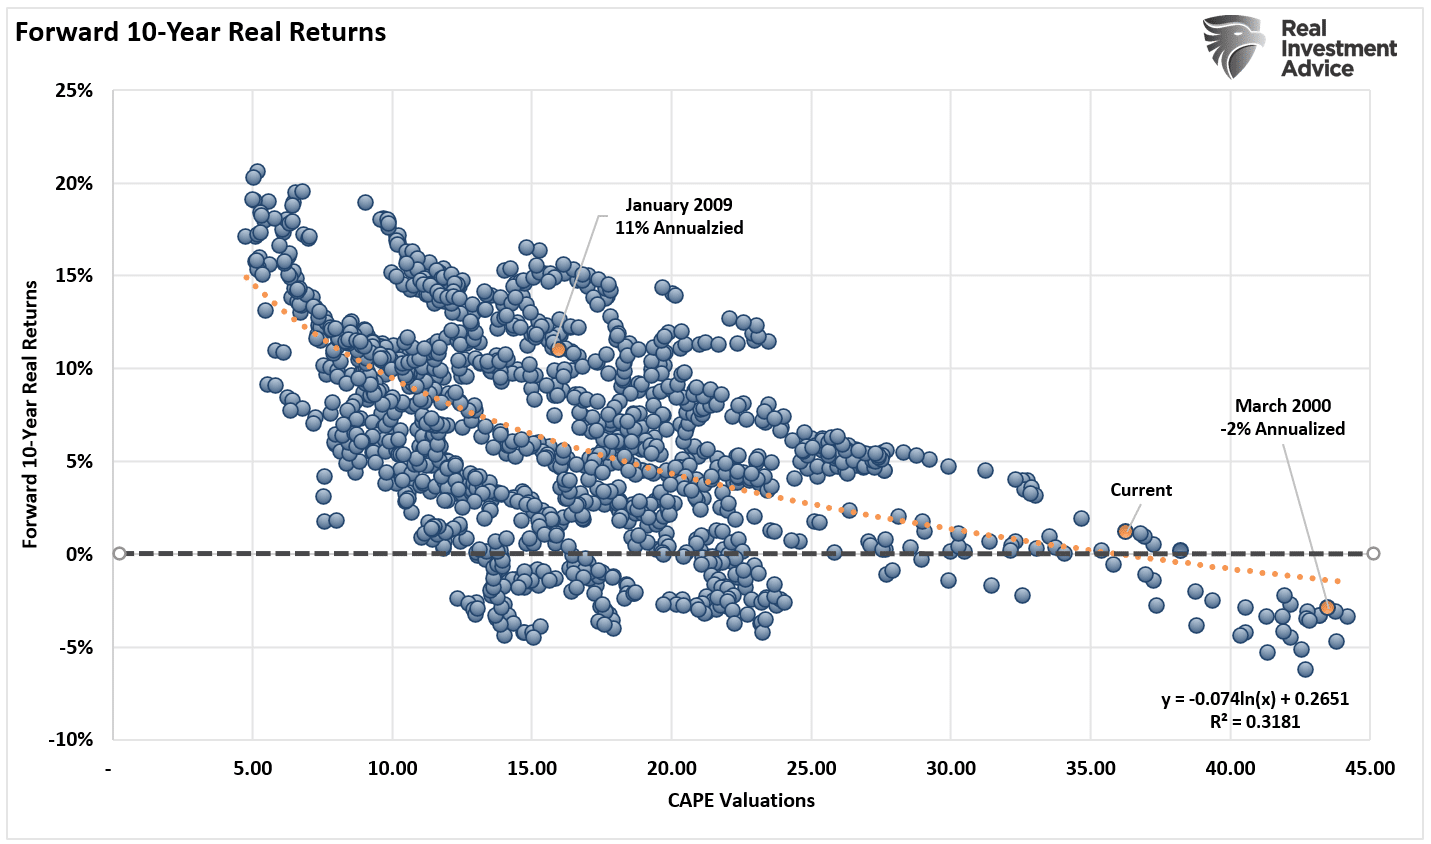 Valuations-Forward 10-Year Returns